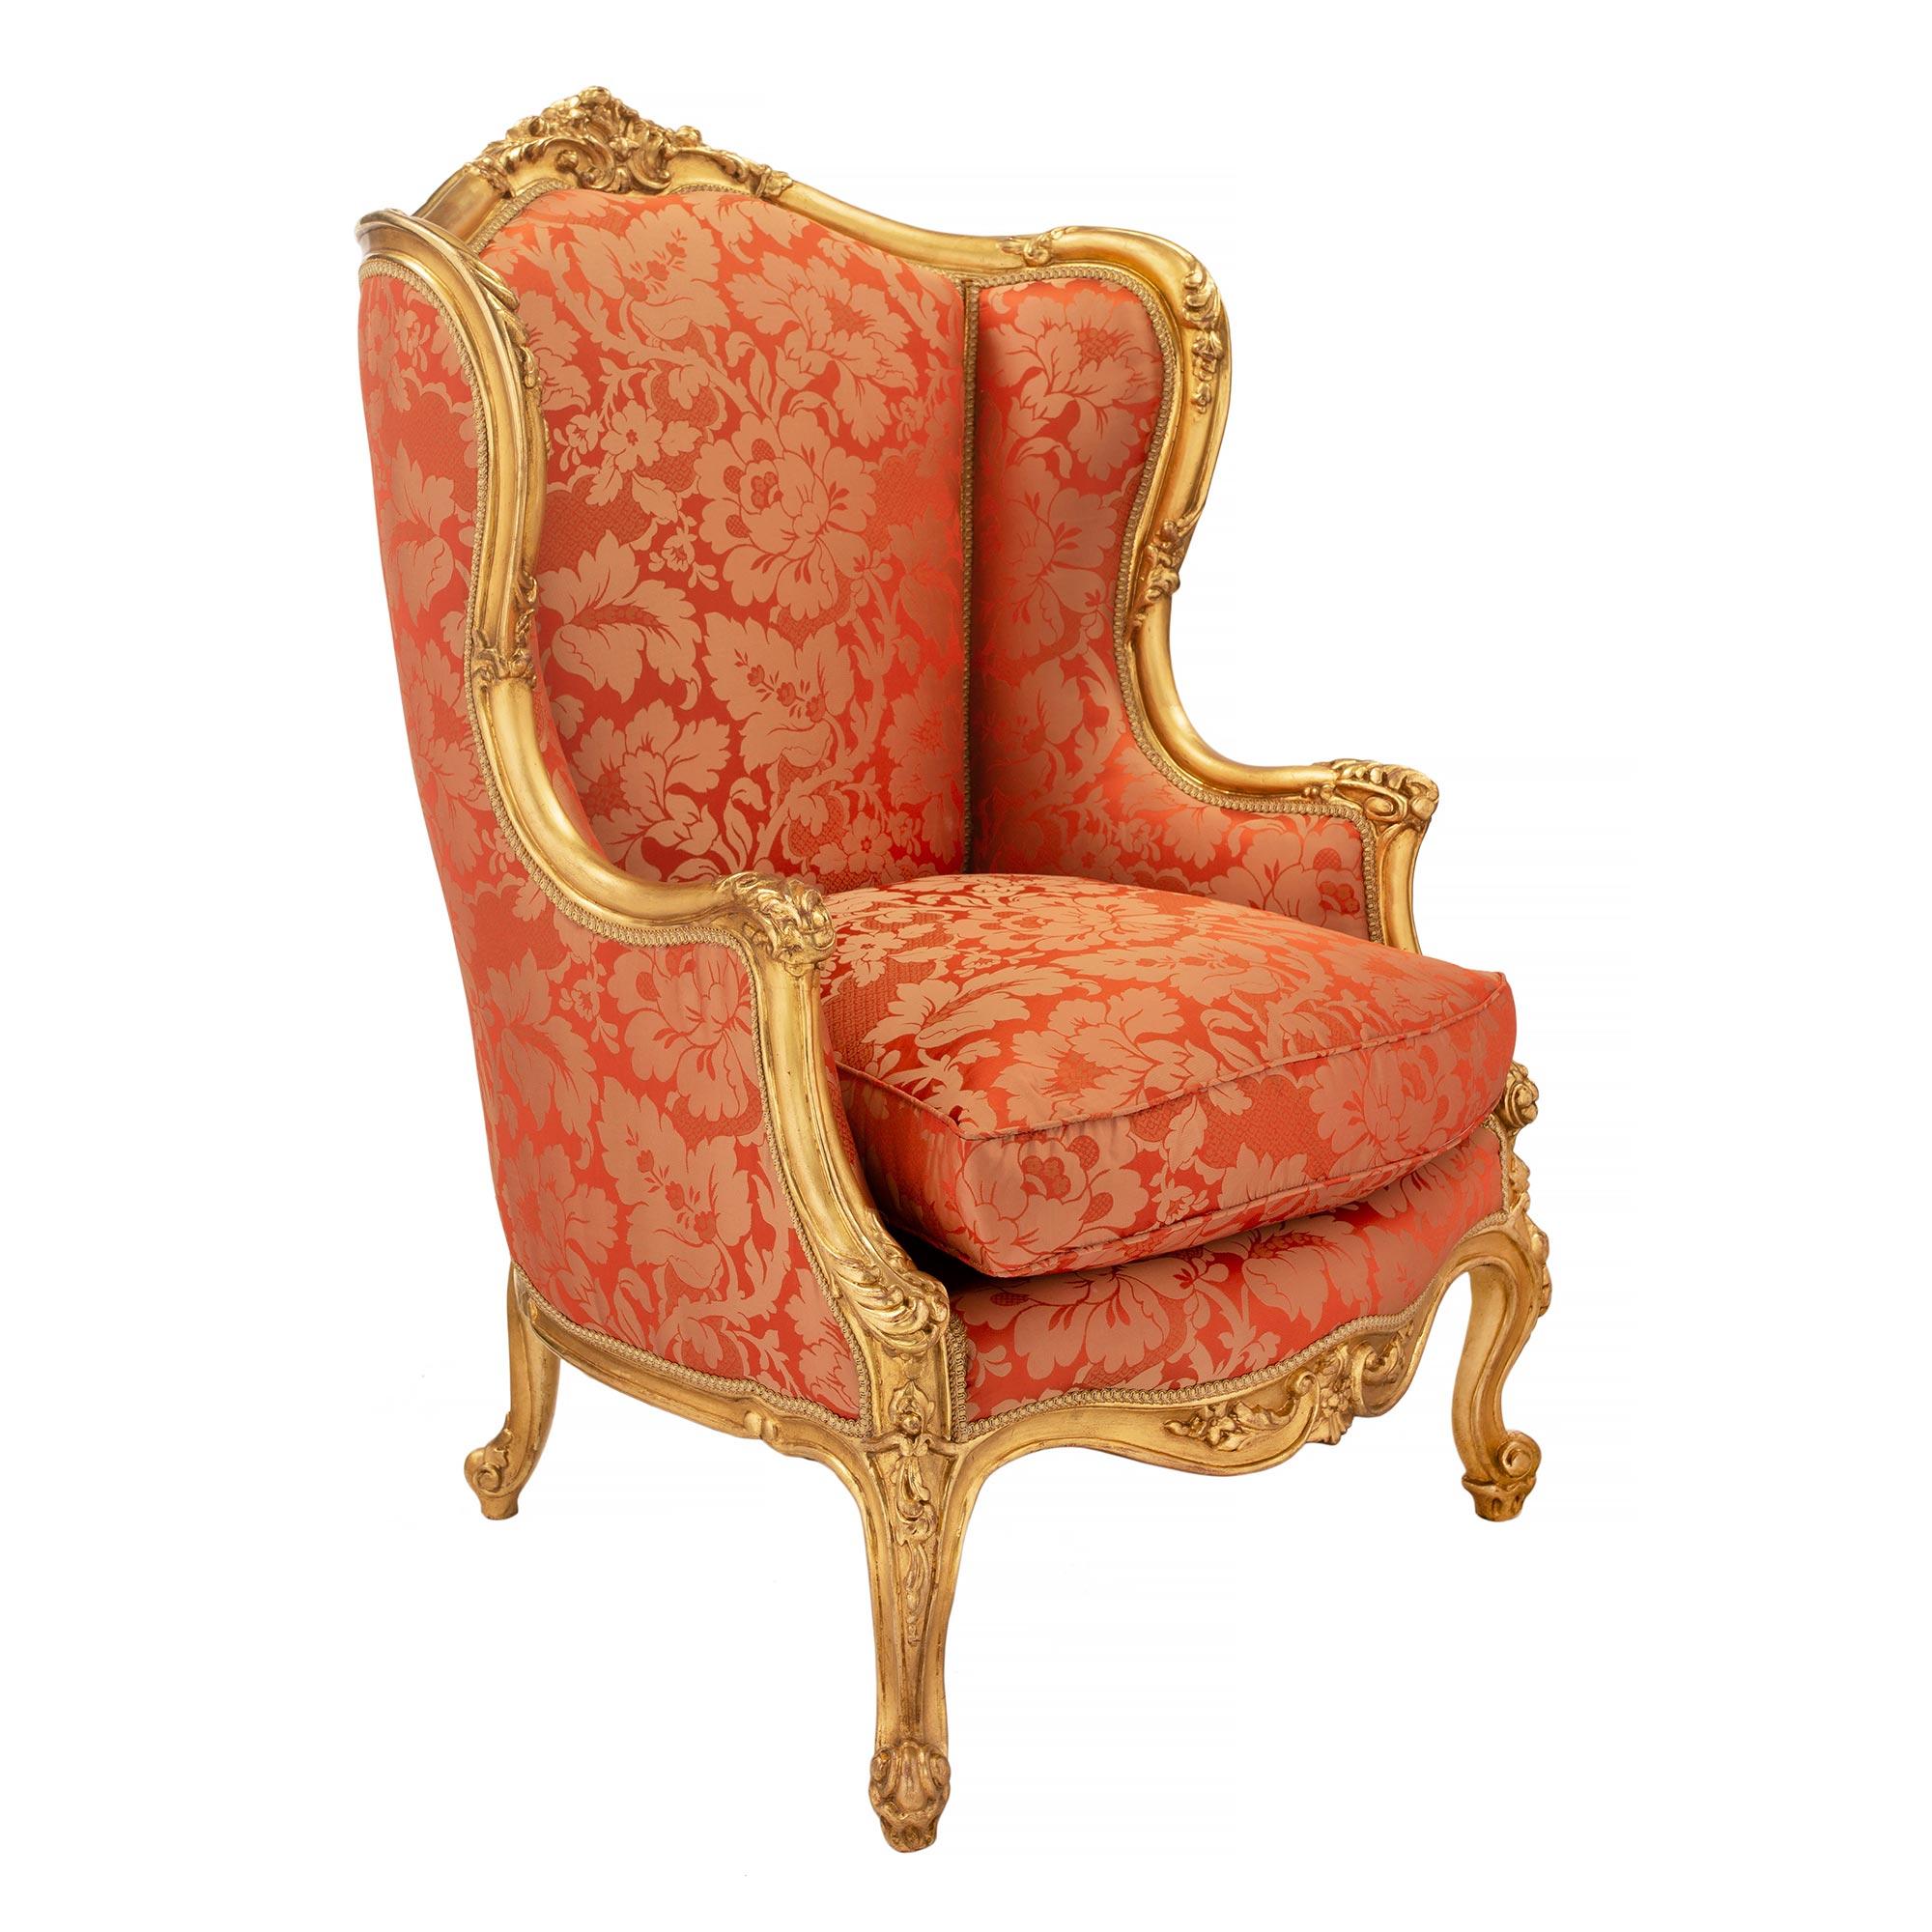 A fine and most elegant pair of French 19th century Louis XV style giltwood Bergères à Oreilles. Each armchair is raised by lovely cabriole legs with scrolled feet and finely detailed floral carvings. The arbalest shaped frieze is centered by